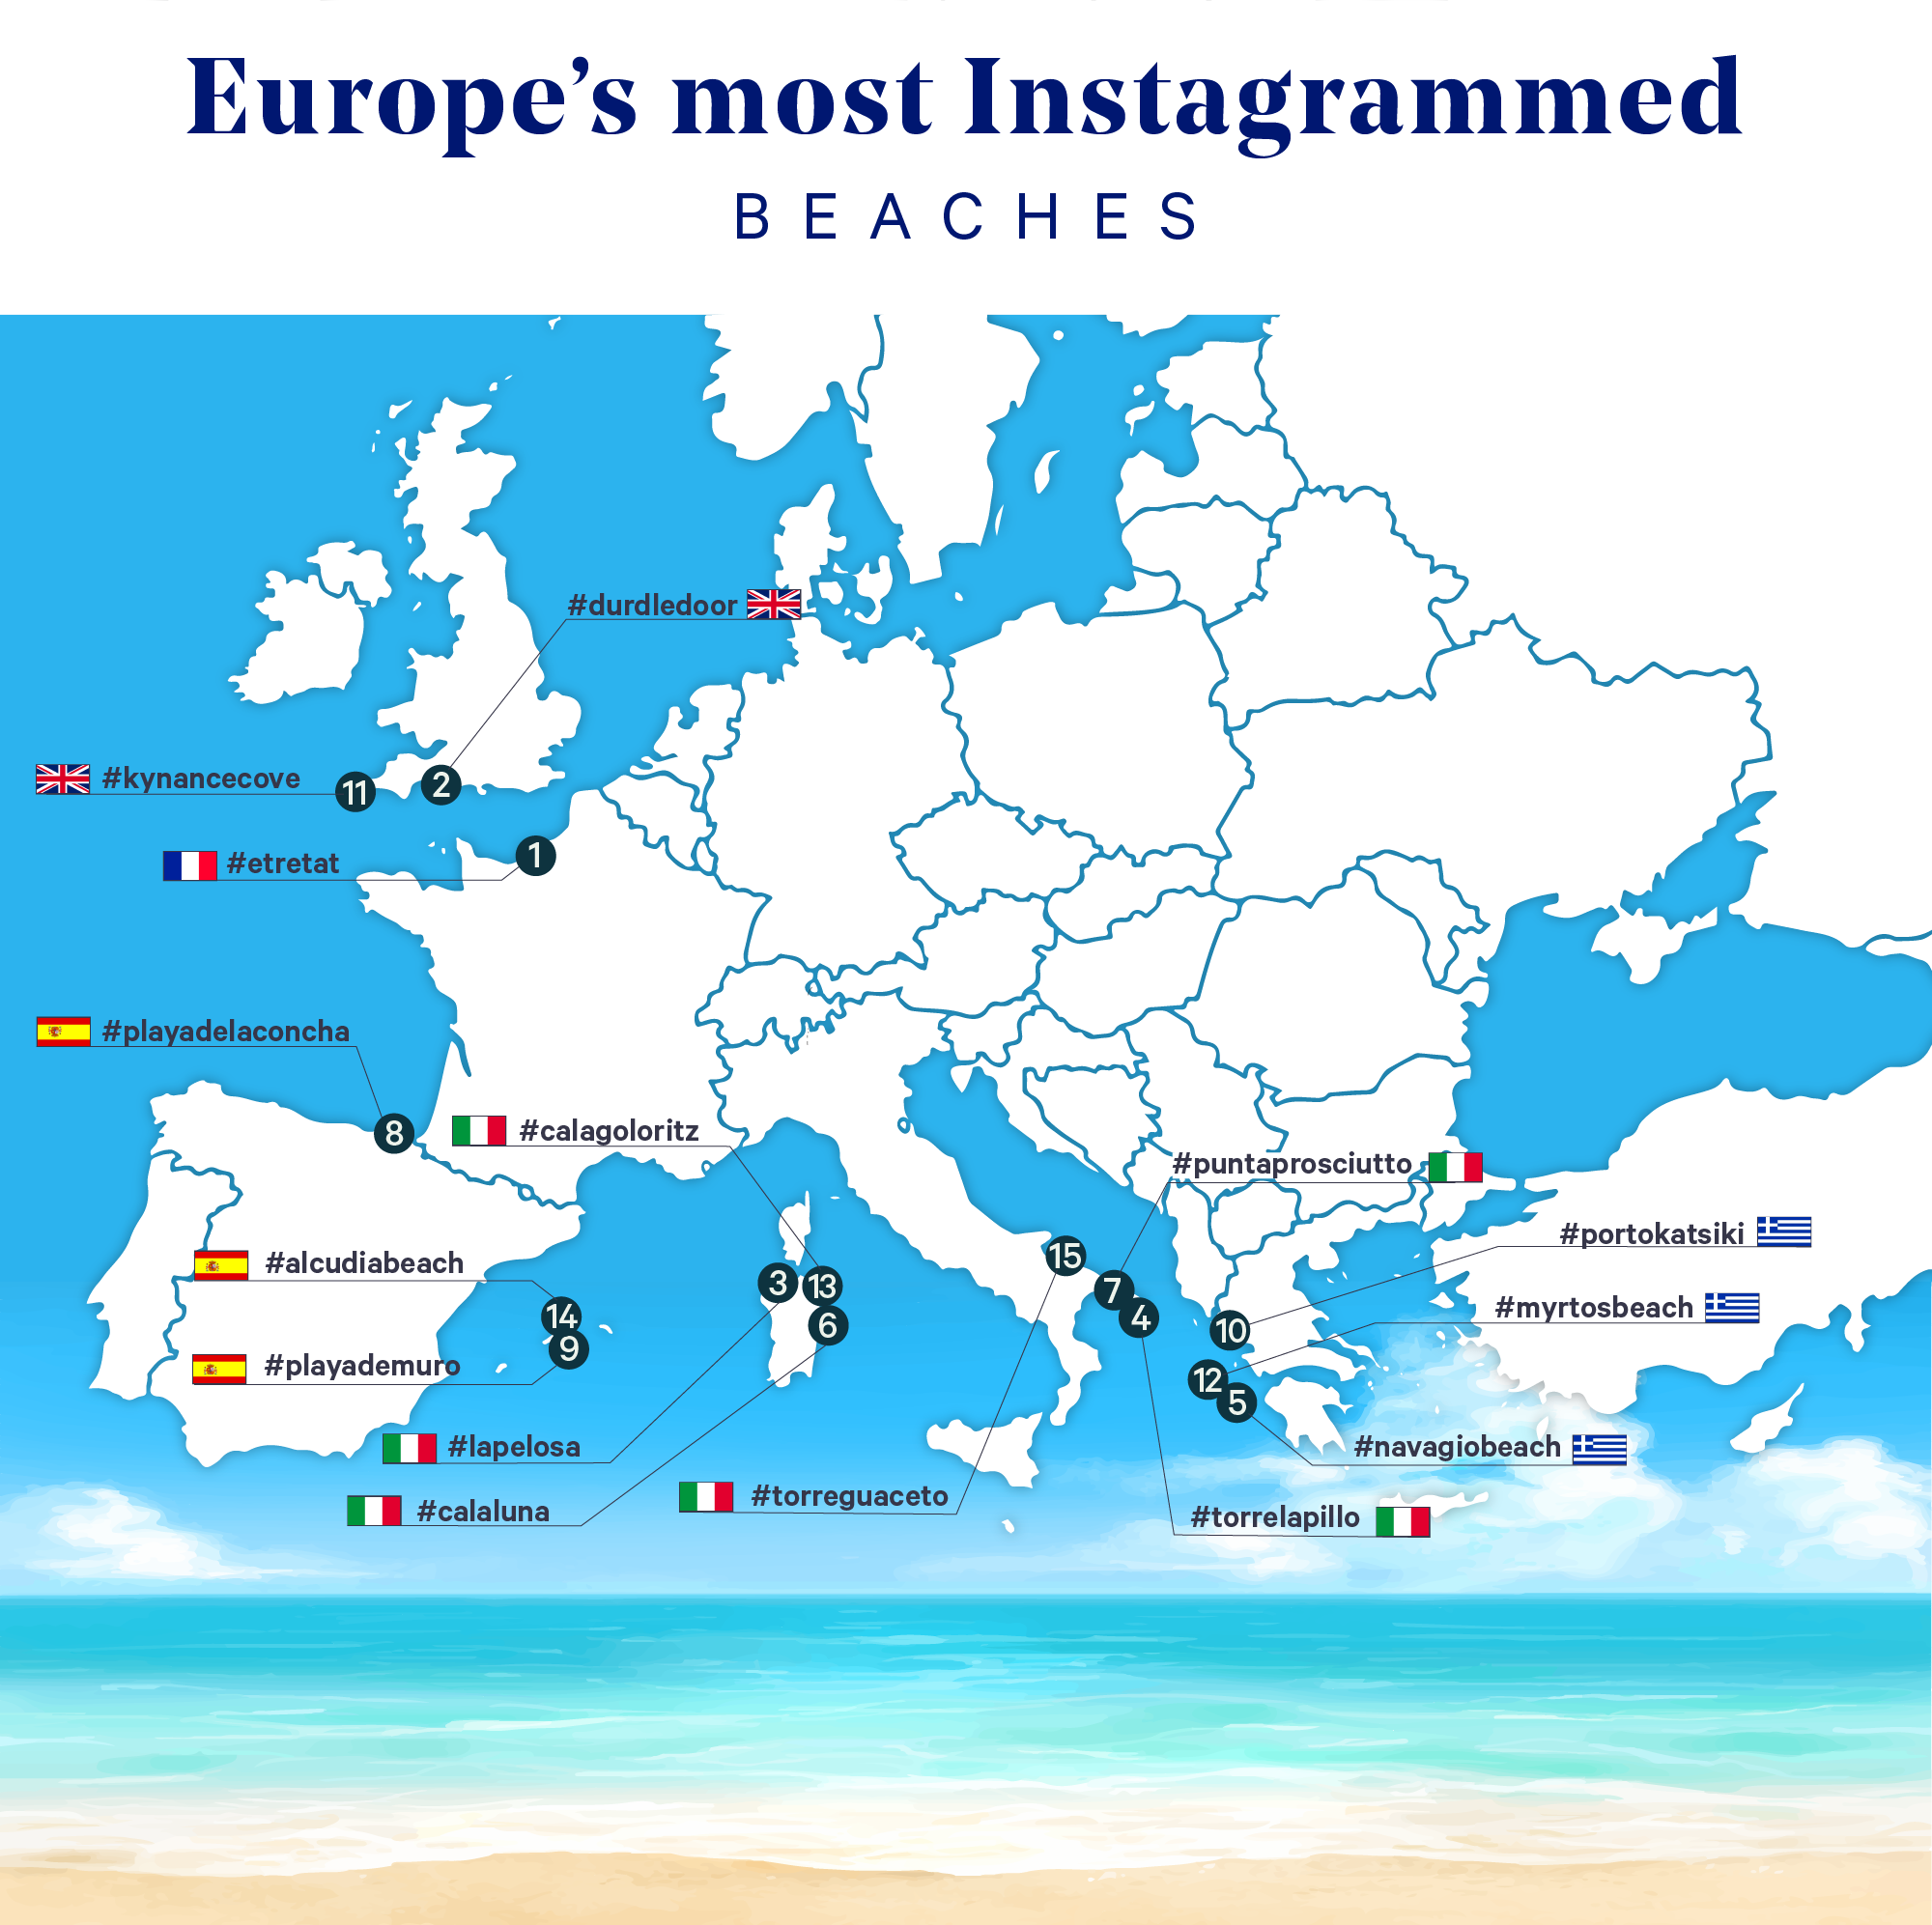 The 8 best beaches in Europe to post on Instagram - The Thinking